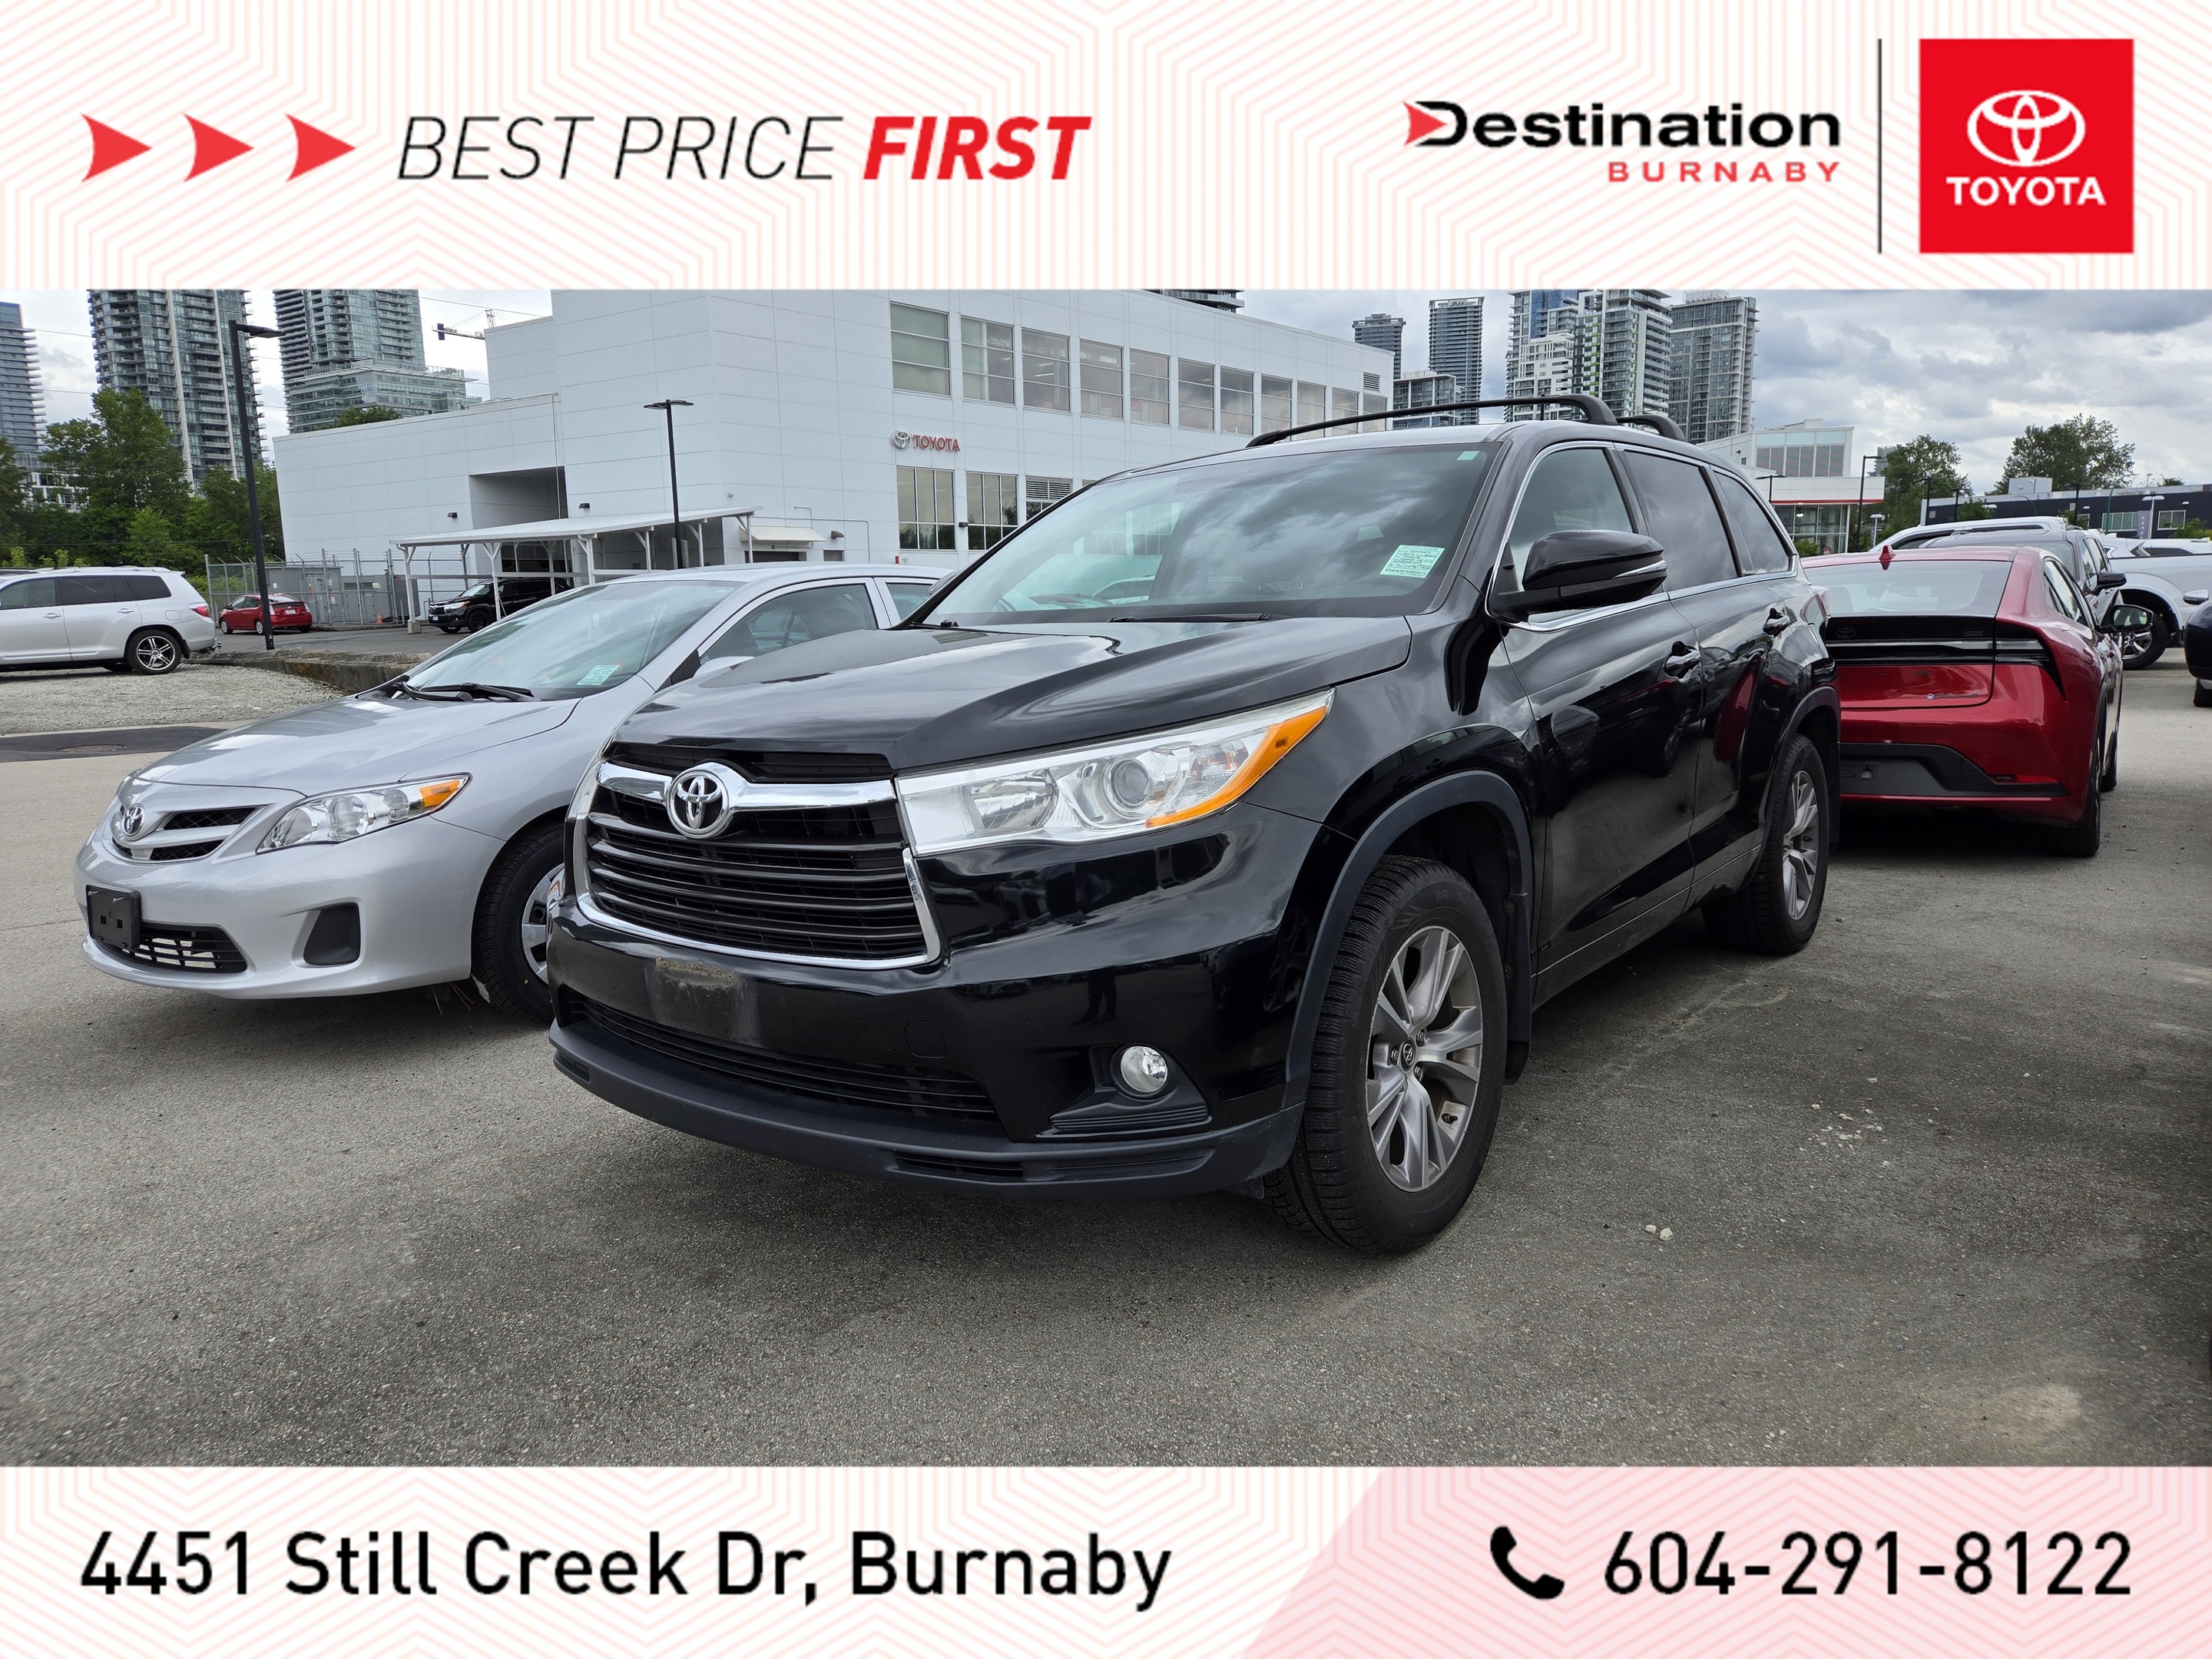 2016 Toyota Highlander LE AWD w/ Convenience - Local, No Accidents!